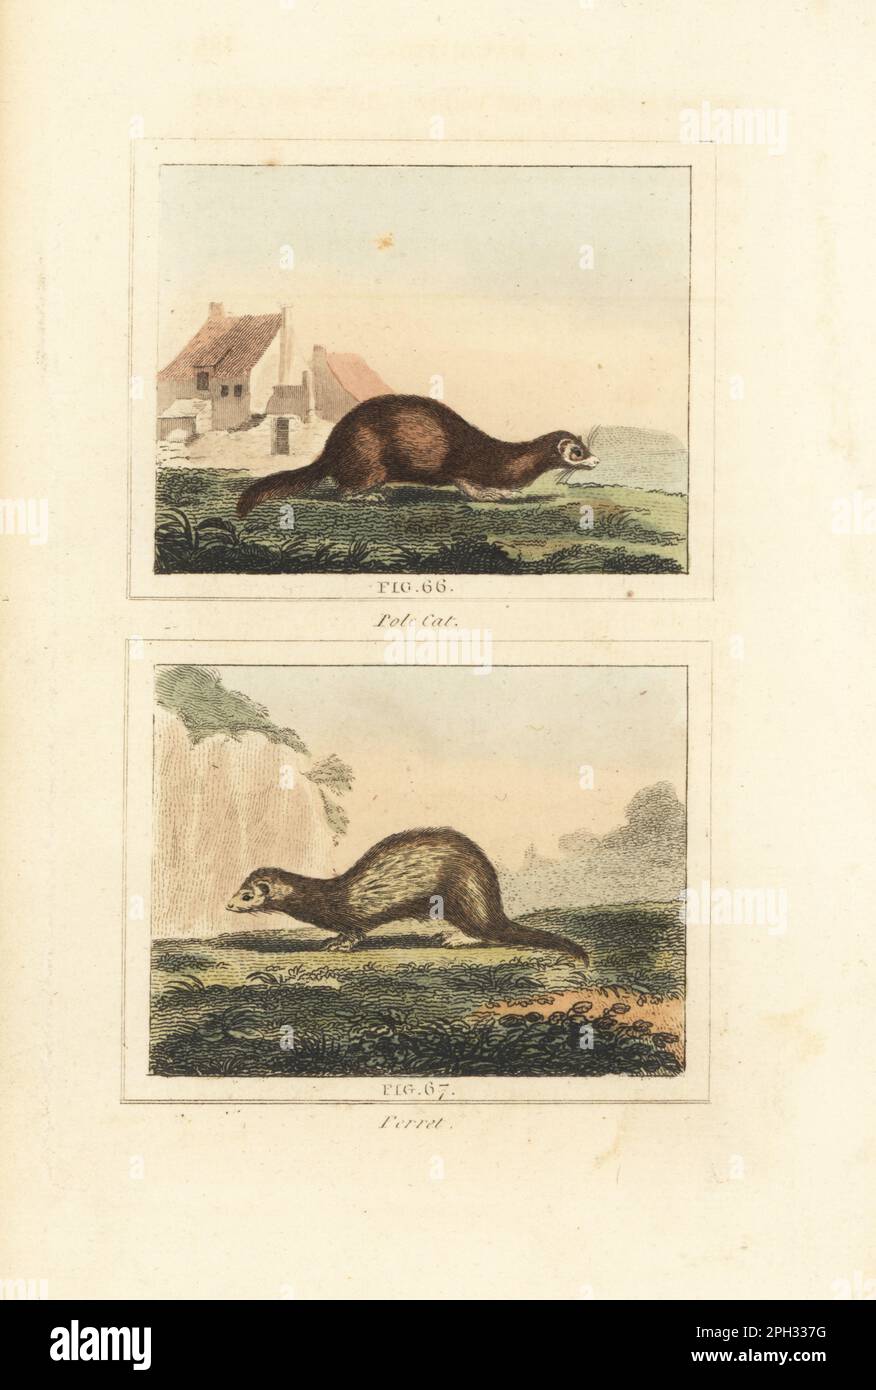 European polecat, Mustela putorius 66, and ferret, Mustela furo 67. Handcoloured copperplate engraving after Jacques de Seve from James Smith Barr’s edition of Comte Buffon’s Natural History, A Theory of the Earth, General History of Man, Brute Creation, Vegetables, Minerals, T. Gillet, H. D. Symonds, Paternoster Row, London, 1807. Stock Photo